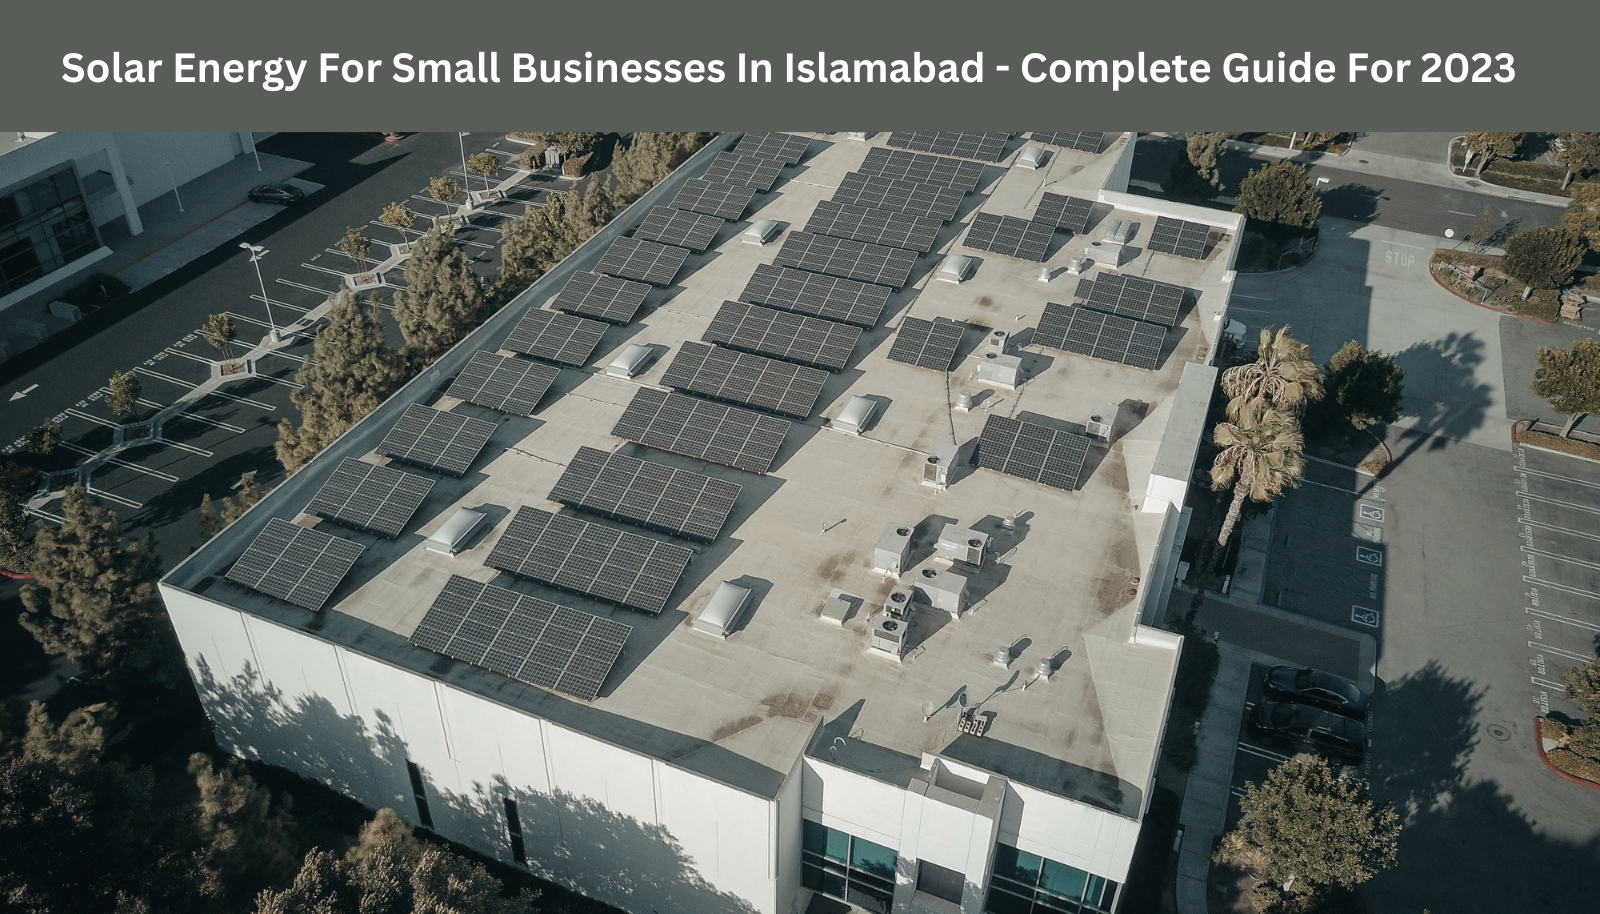 Solar-Energy-for-Small-Businesses-in-Islamabad-A-Practical-Guide-for-2023